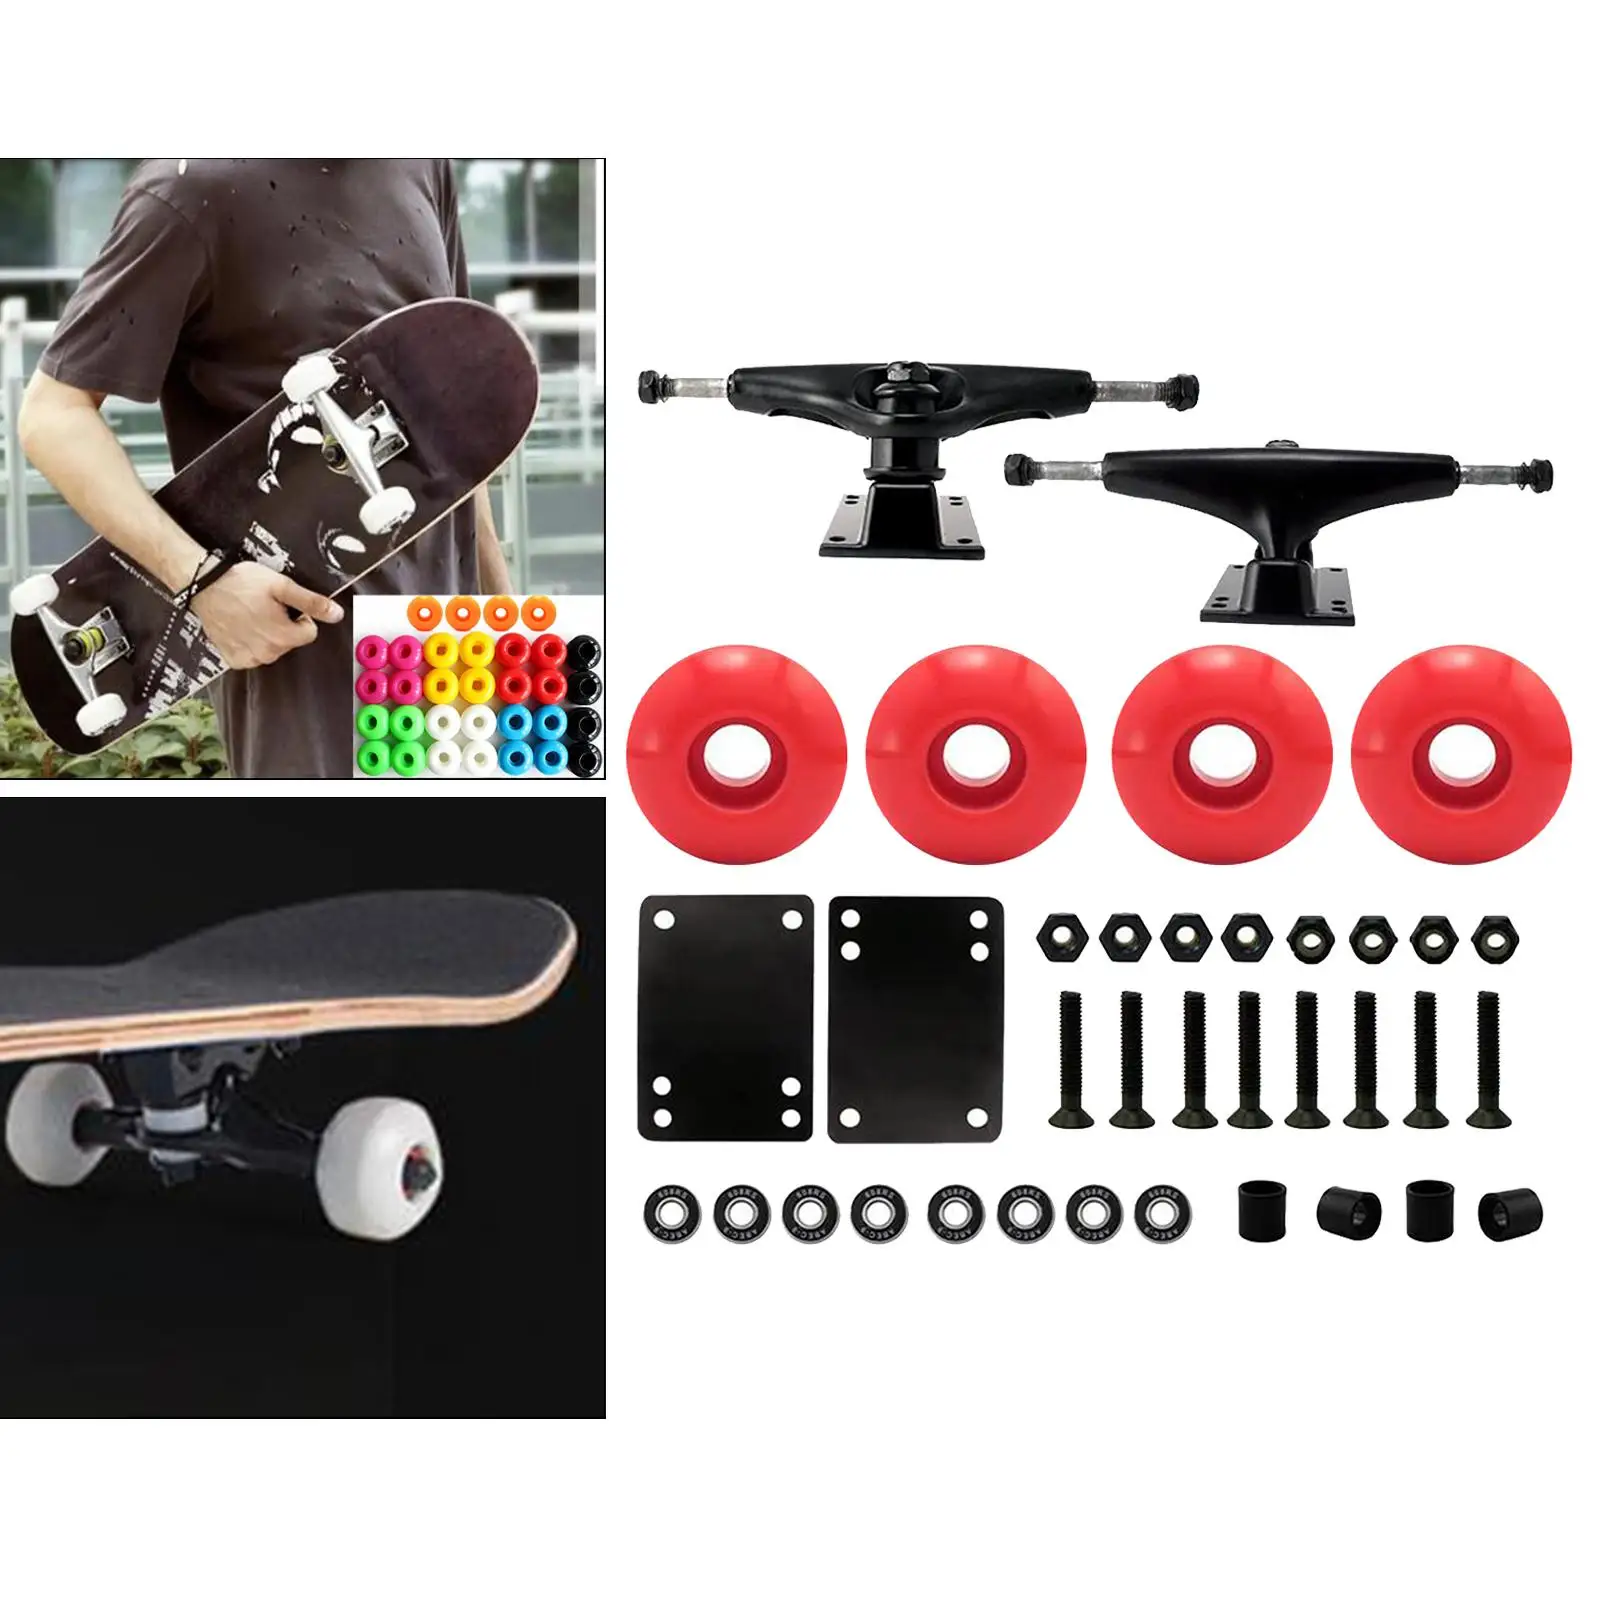 Skateboard Package 5 Inch Trucks with 52mm Wheels + Components, Bearings  with Nearly Every Skate Wheel